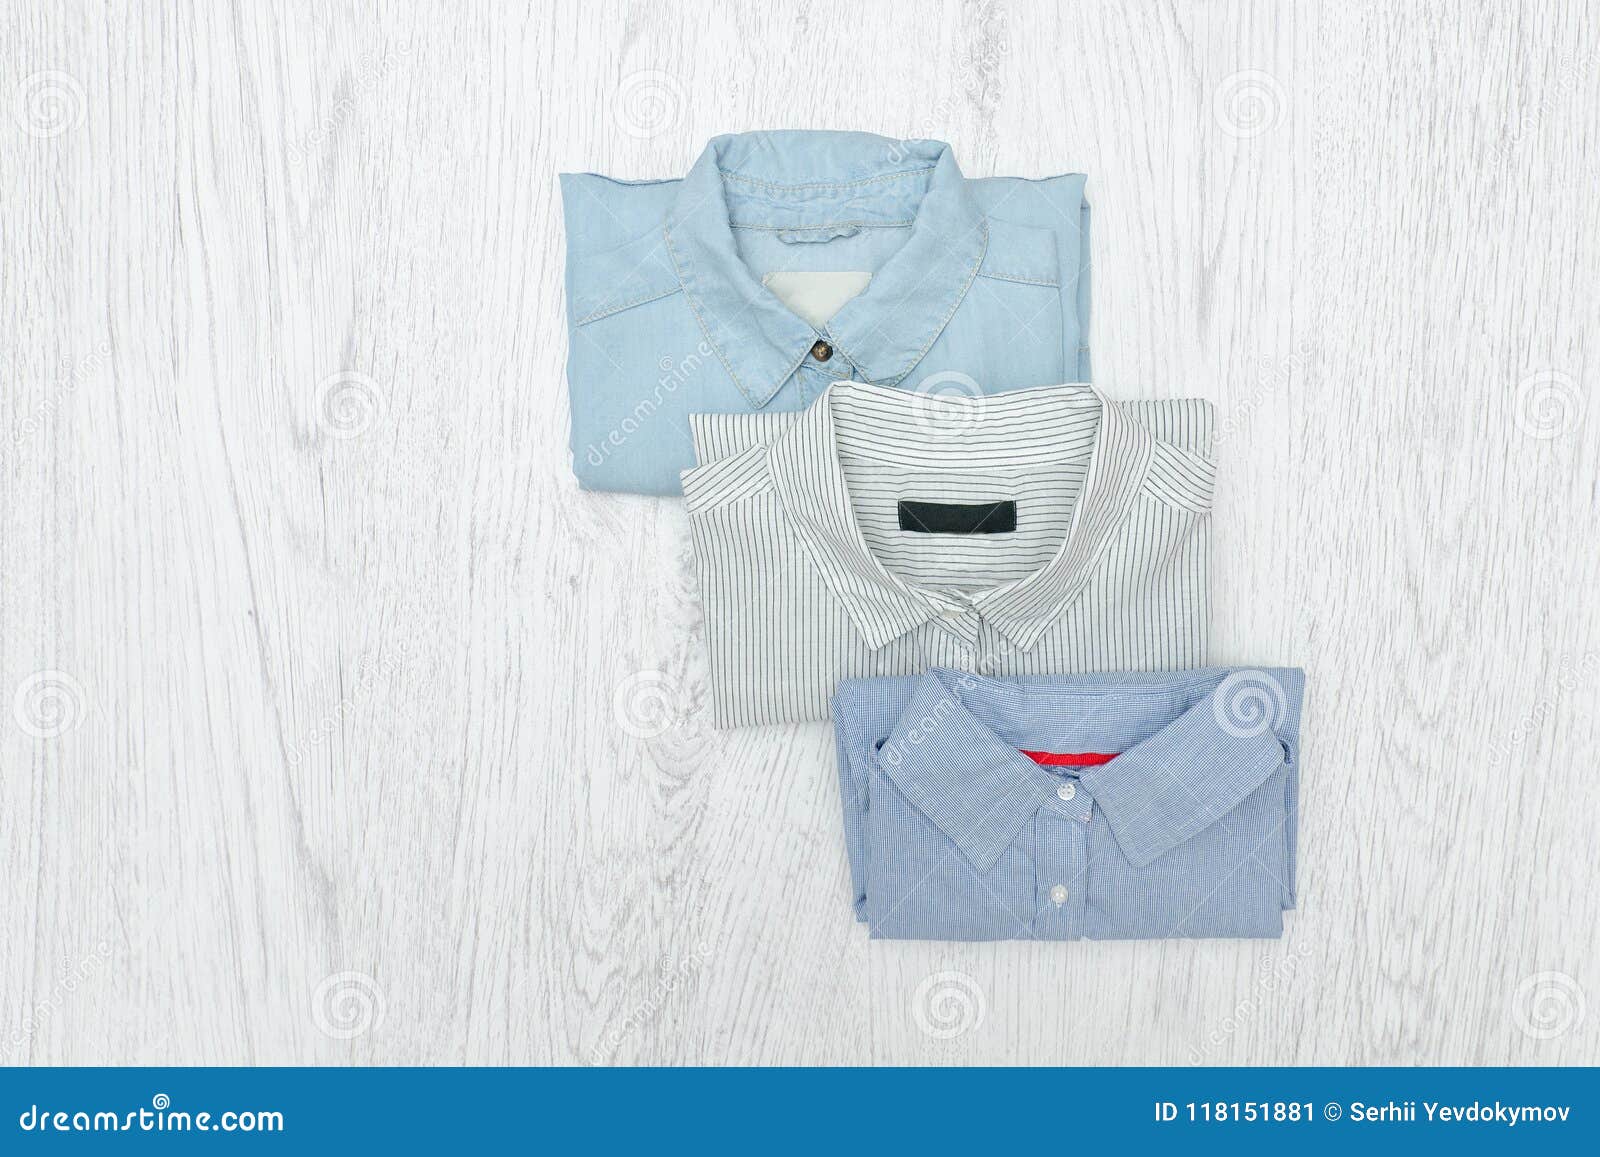 Three Different Shirts. Fashionable Concept Stock Image - Image of ...